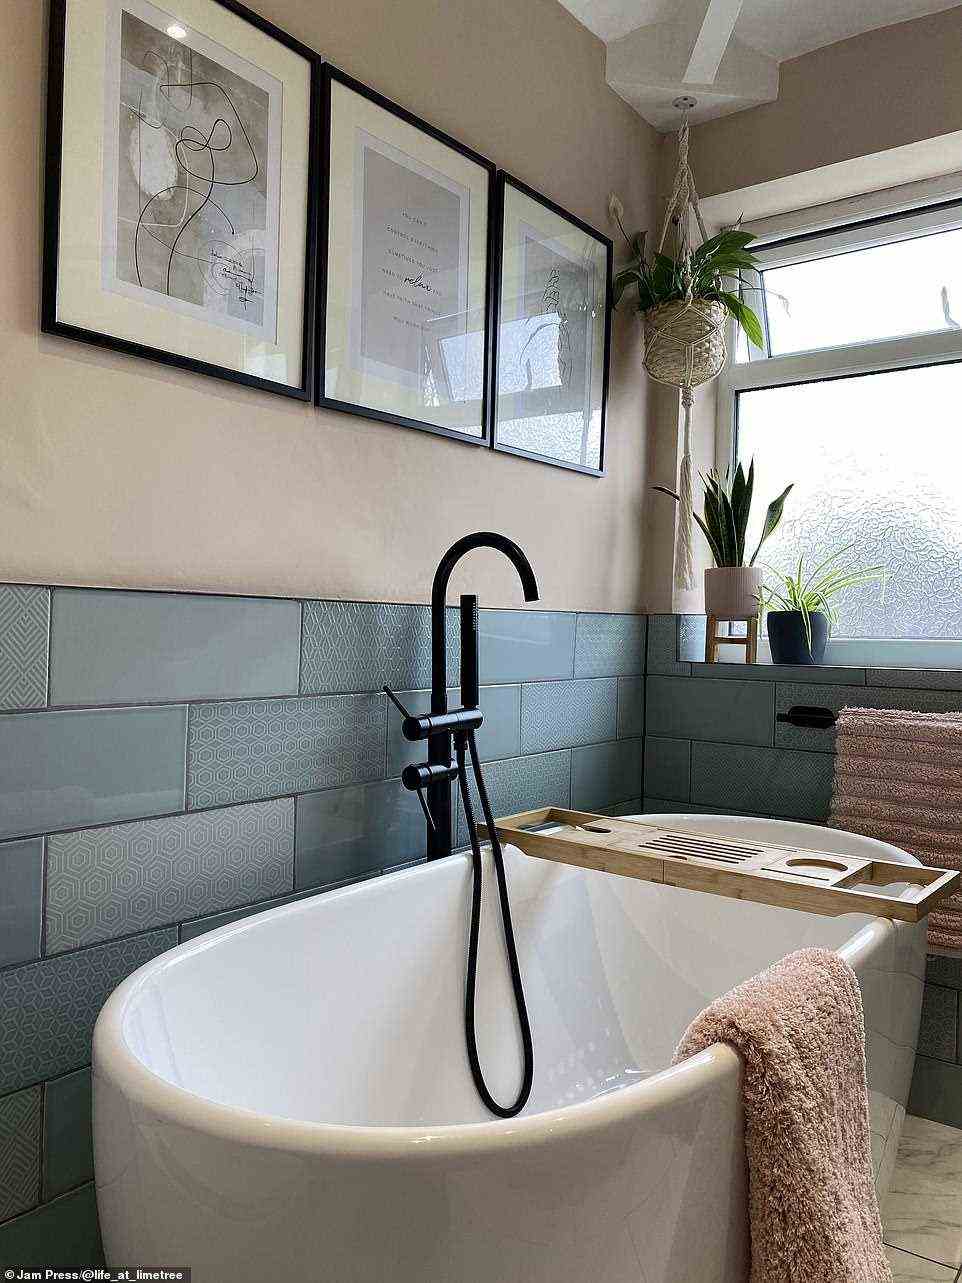 The couple decorated their new bathroom with artworks and plants to make it a cosy relaxing room, perfect for a soak after a busy week, pictured